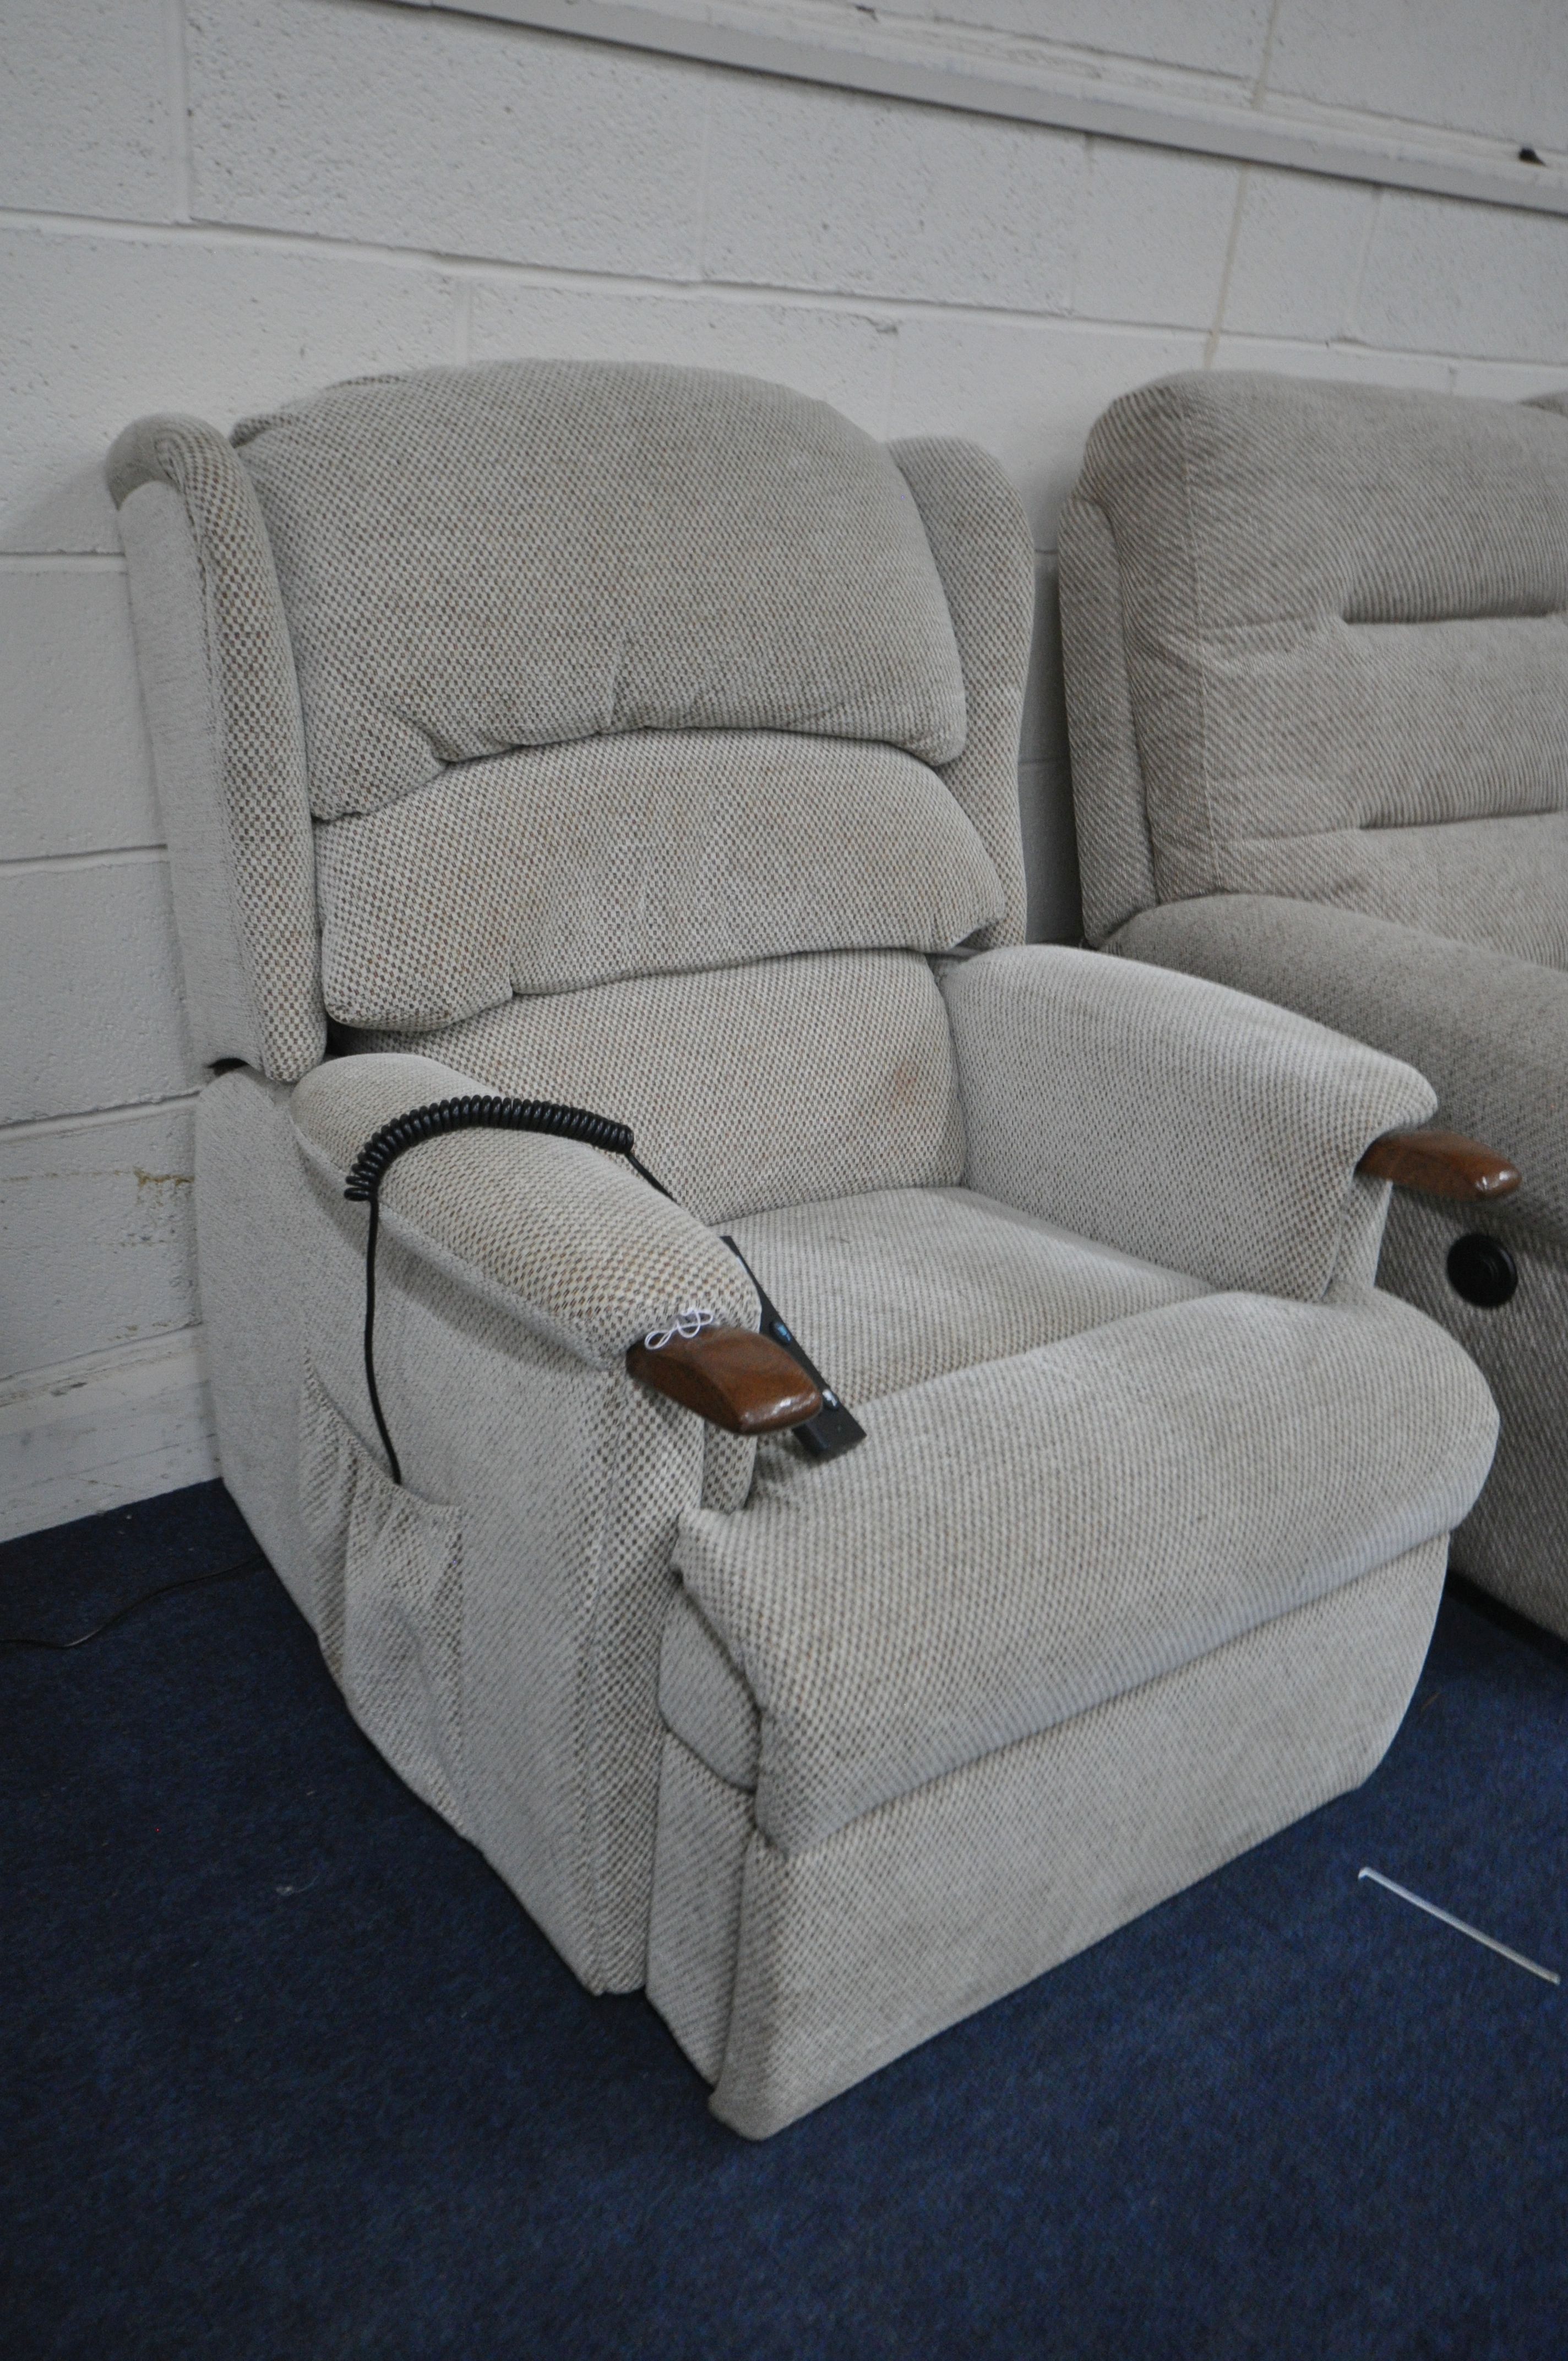 A BEIGE UPHOLSTERED HSL ELECTRIC RISE AND RECLINE ARMCHAIR (PAT pass and working, slightly dirty